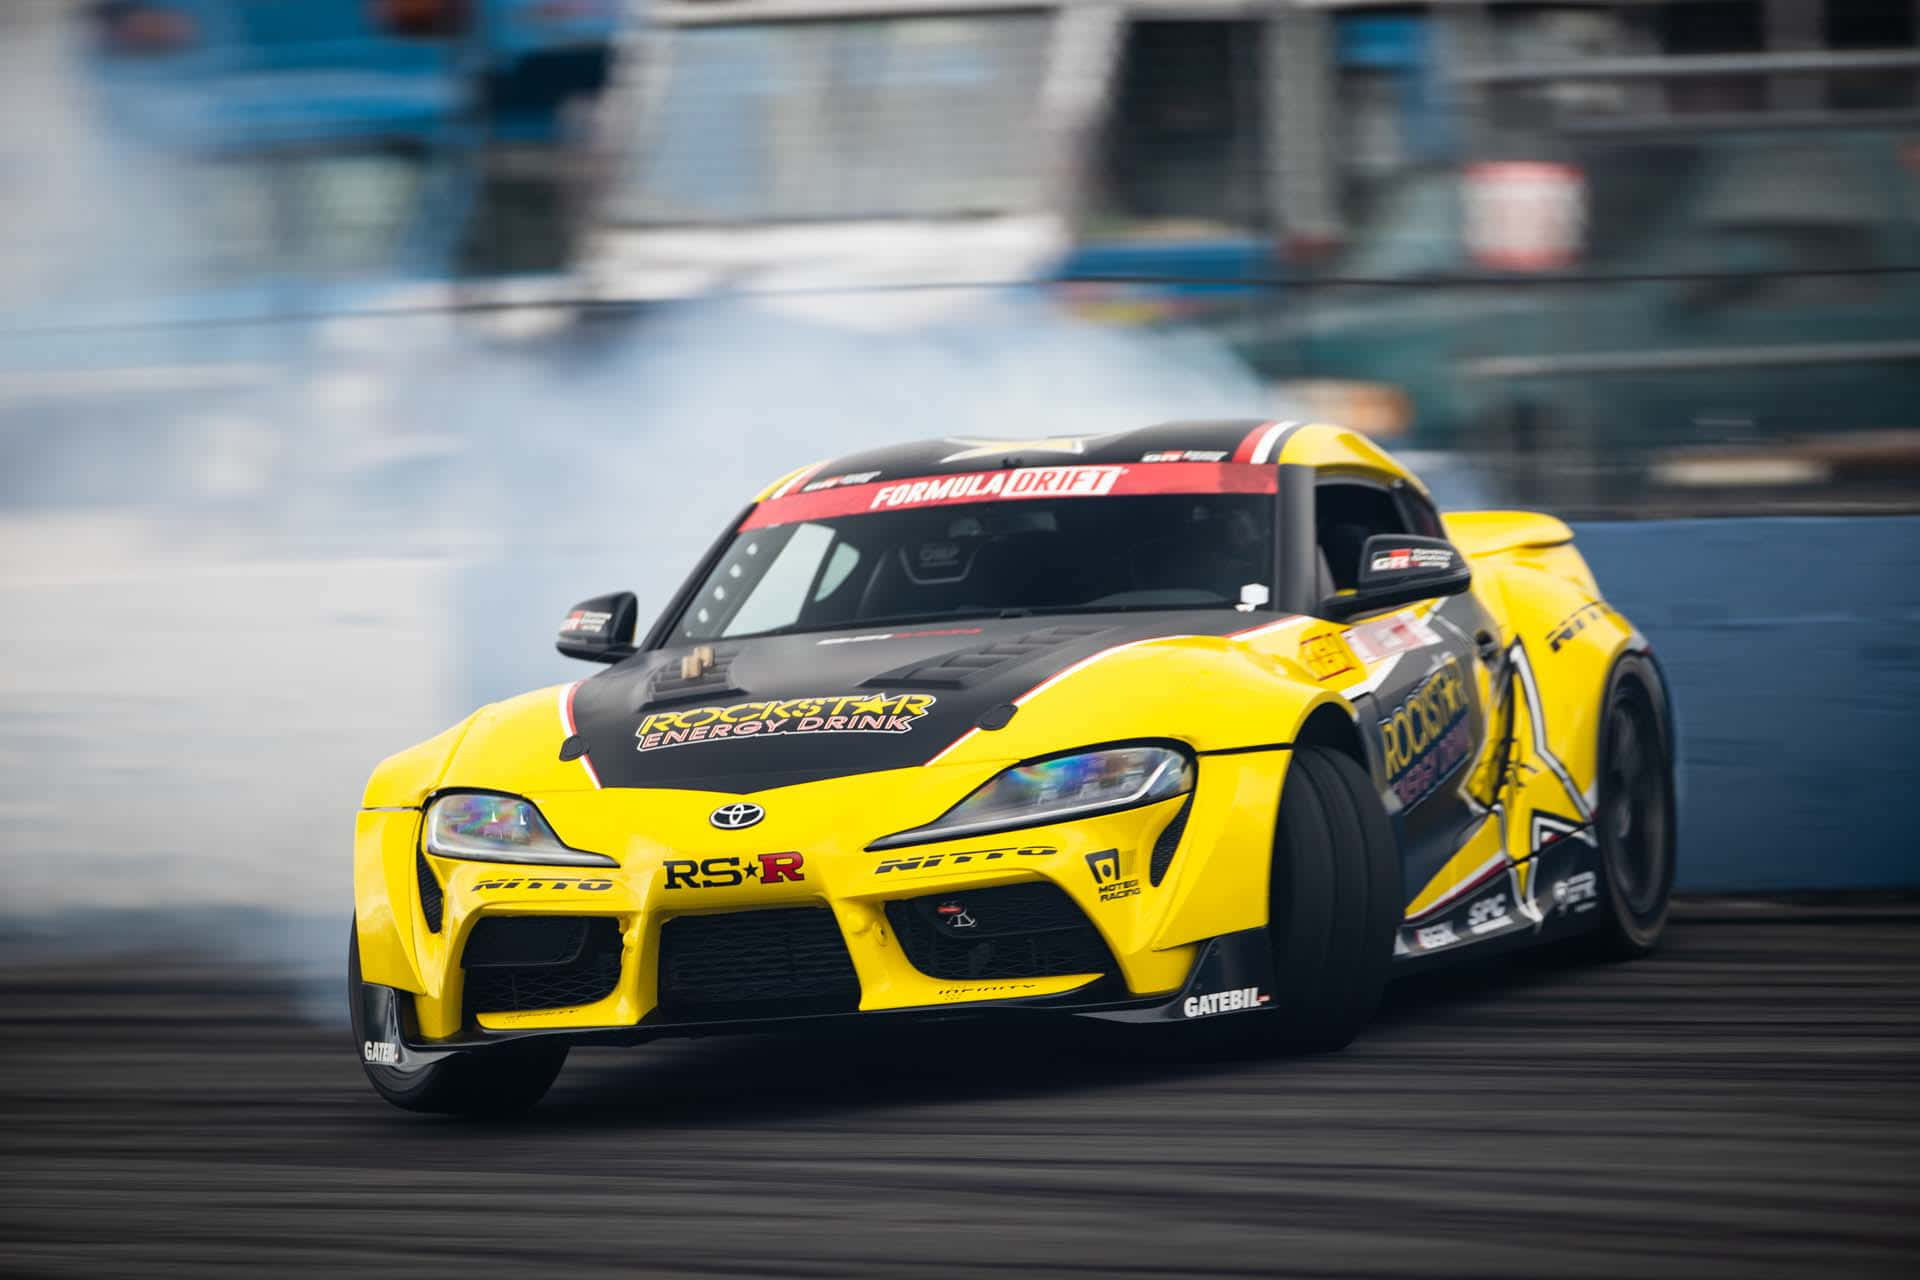 Showing off its powersliding style, this Supra Drift is ready to hit the track. Wallpaper